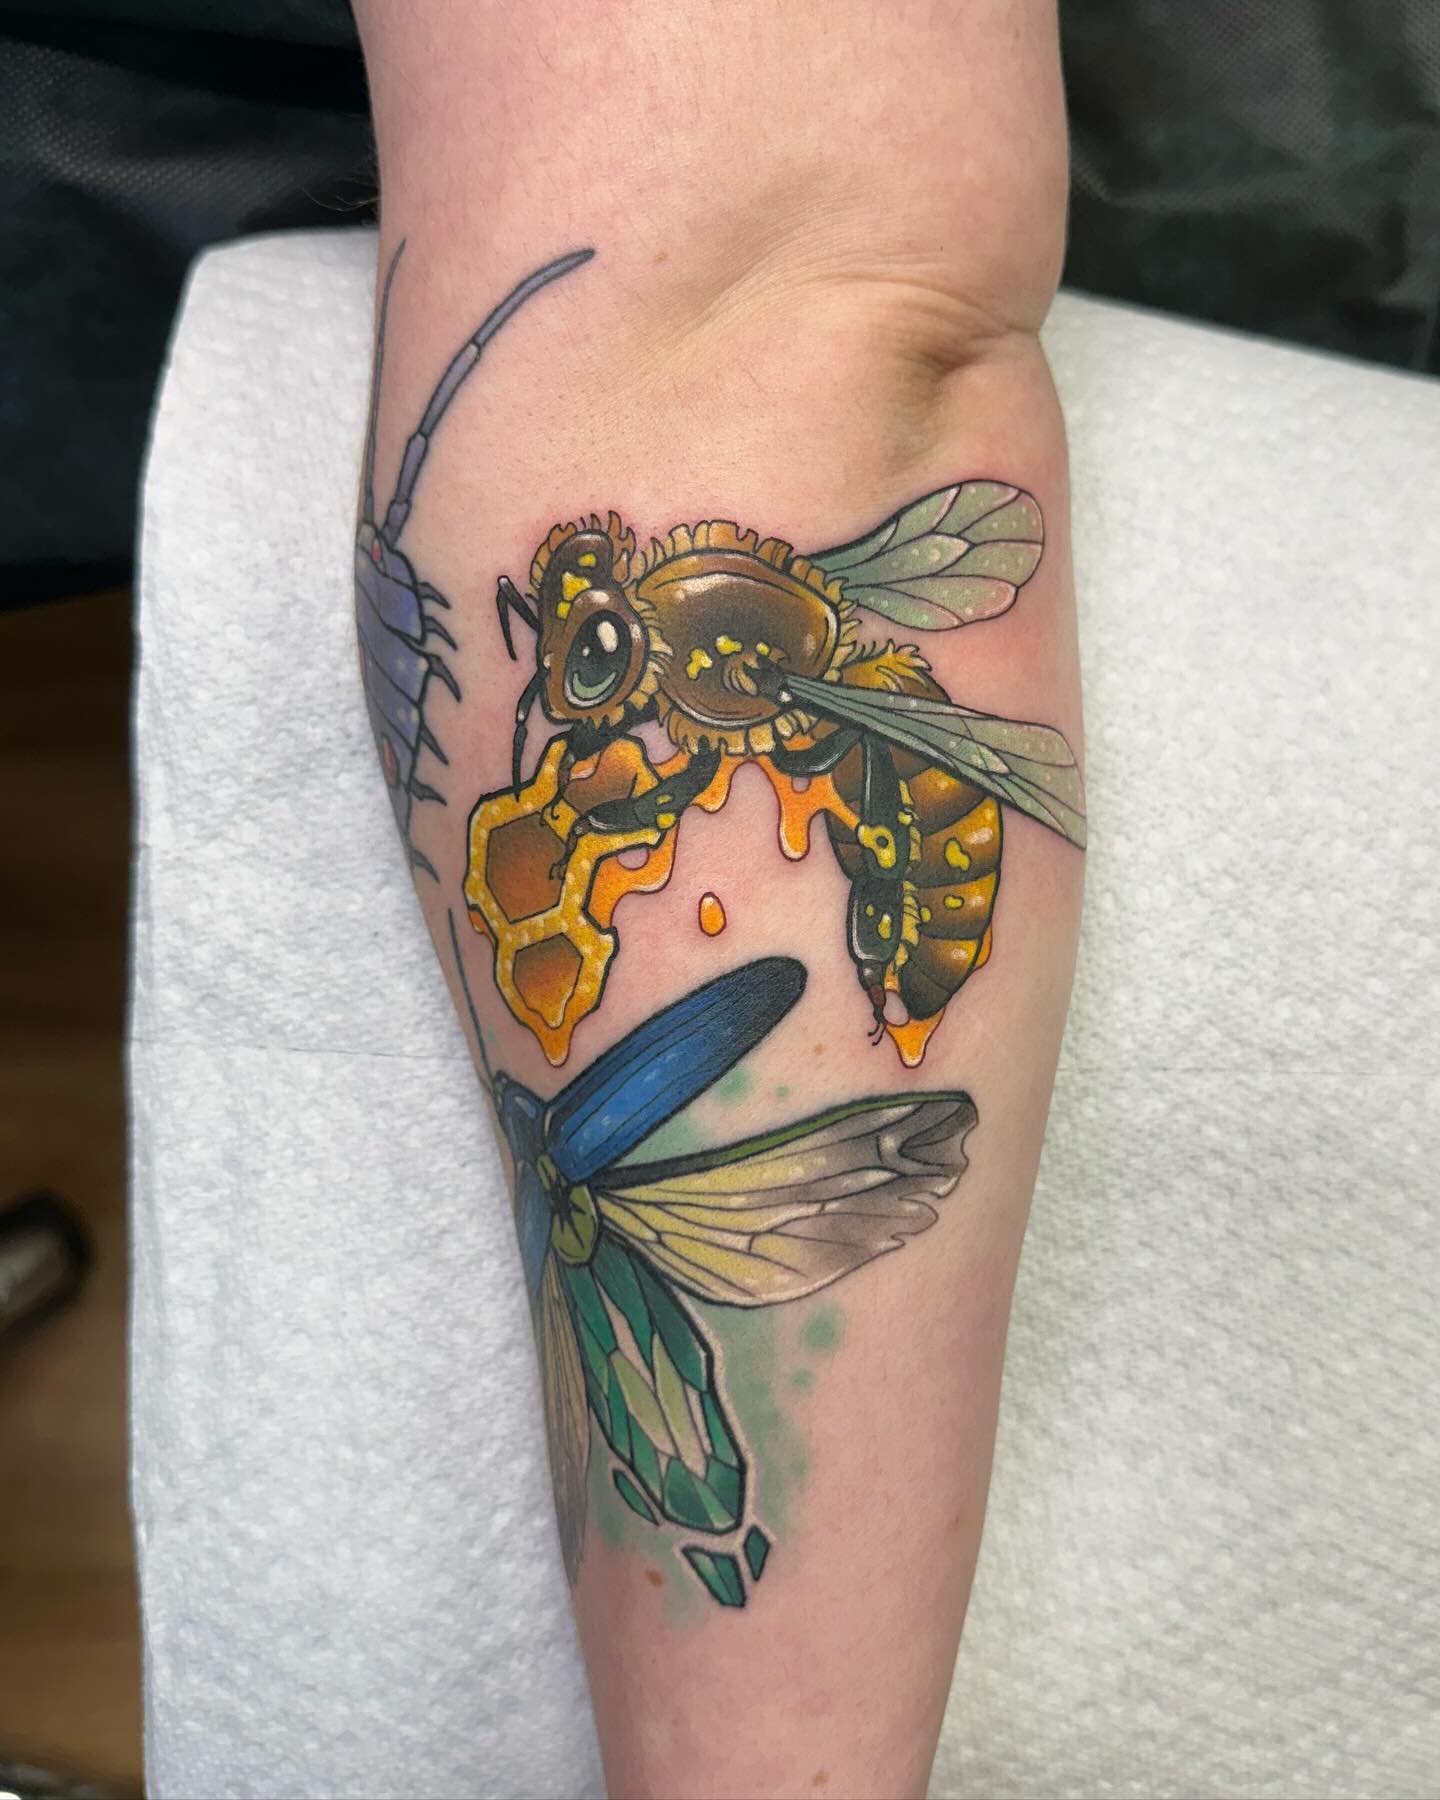 Little bee with a honeycomb chunk for Kristin&rsquo;s growing bug collection🐝🍯✨ thank you so much!
.
.
.
#Tattoo #ladytattooers #ohiotattooers #columbustattooers #whiteraventattoostudio #honeybee #beetattoo #bugtattoo